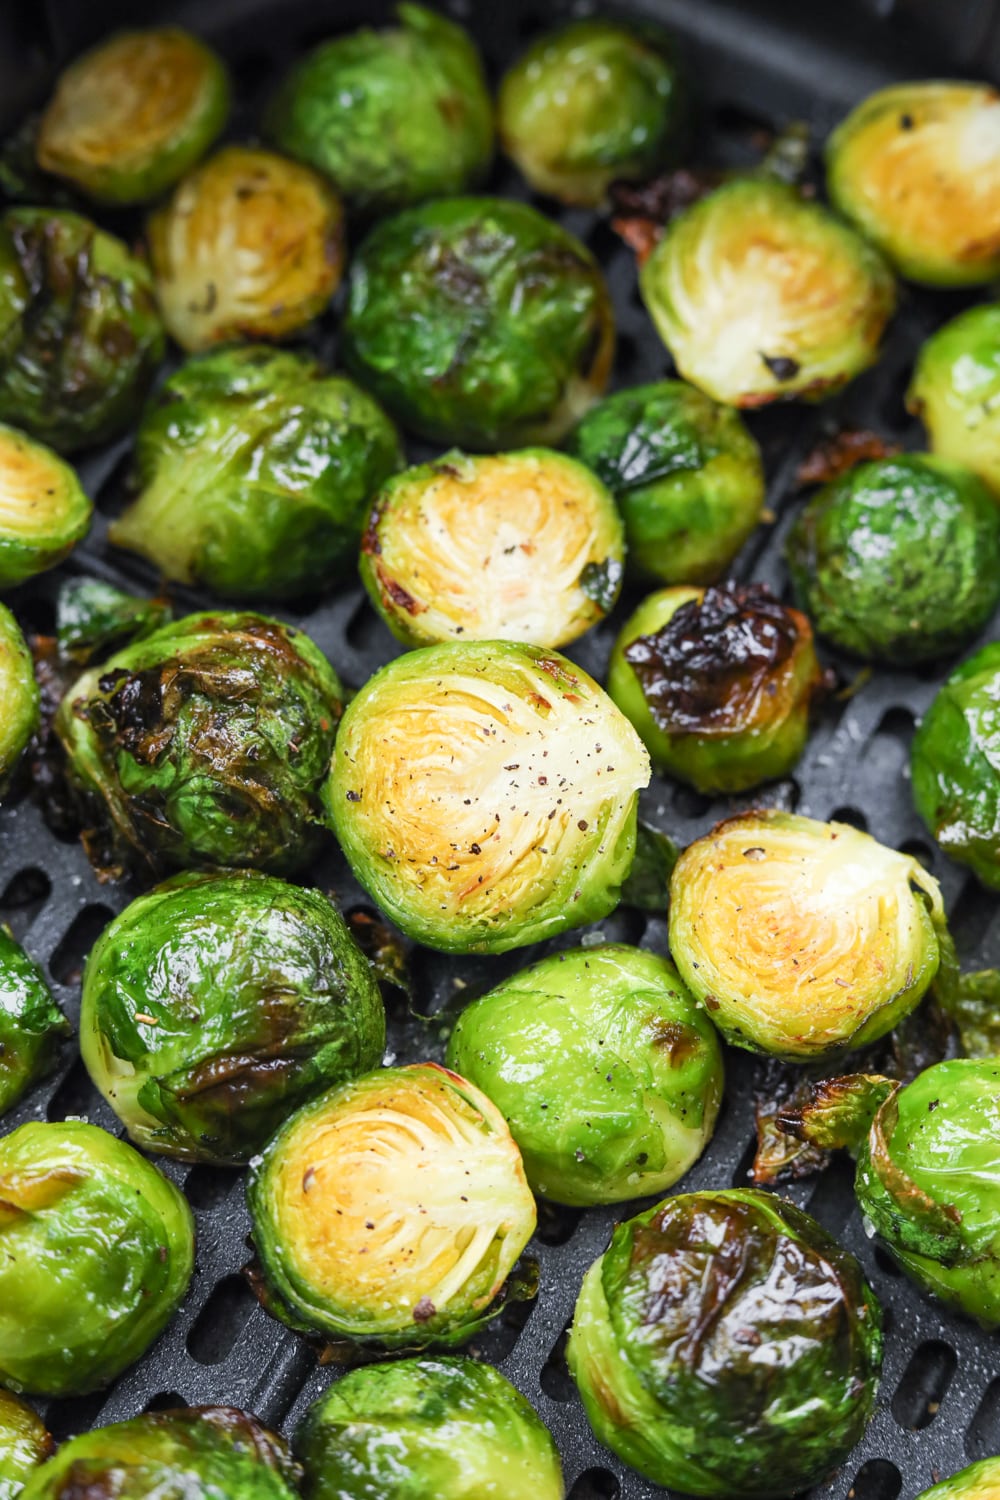 Roasted brussels sprouts in a black air fryer basket.